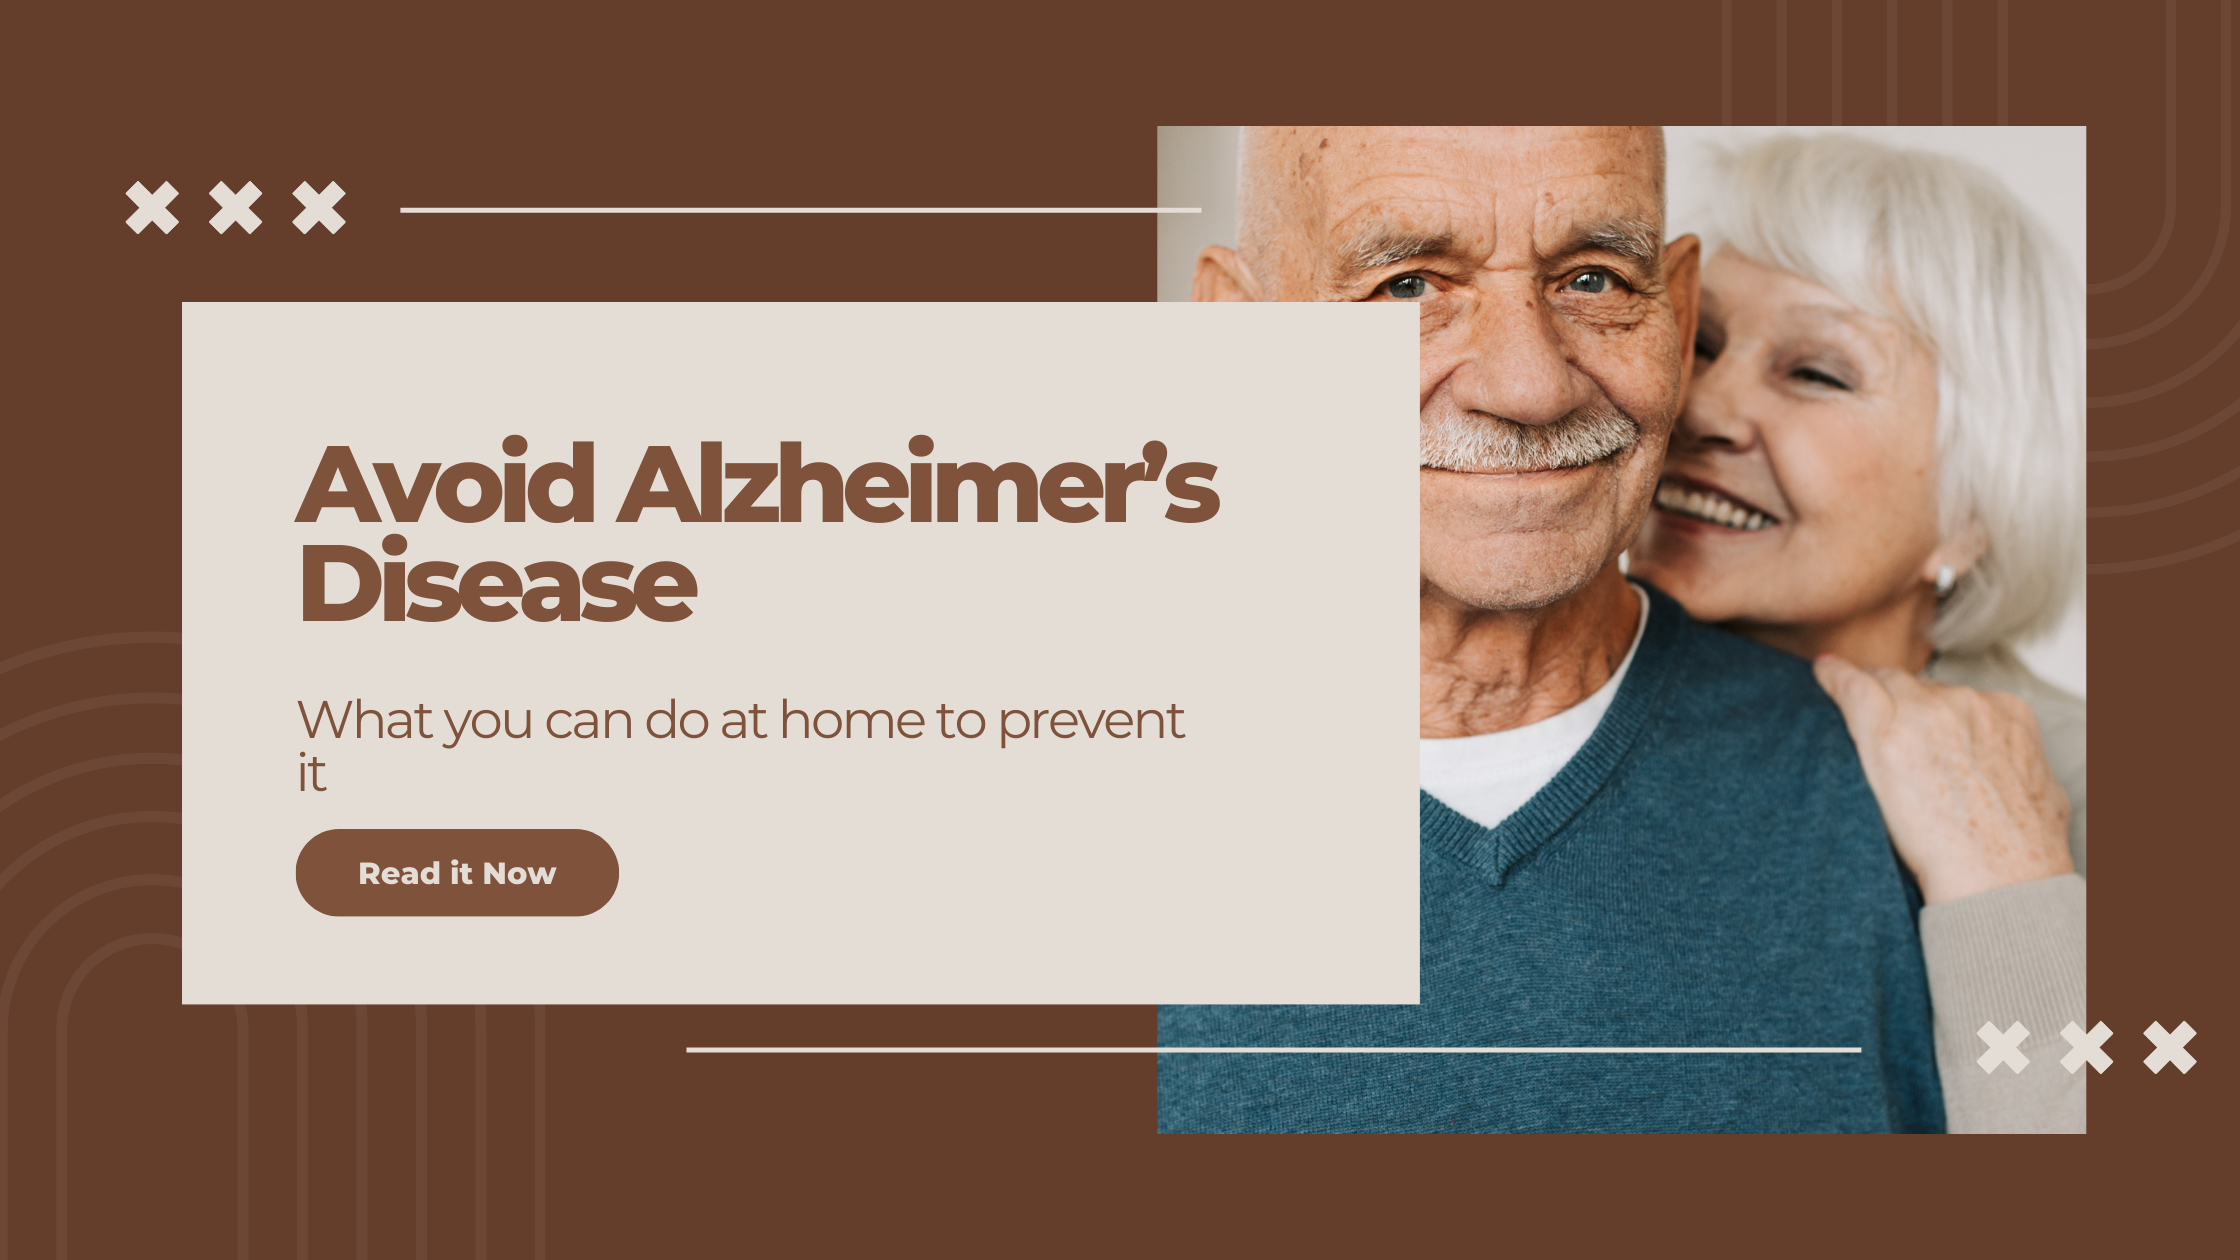 A Guide on How to Avoid Alzheimer’s Disease